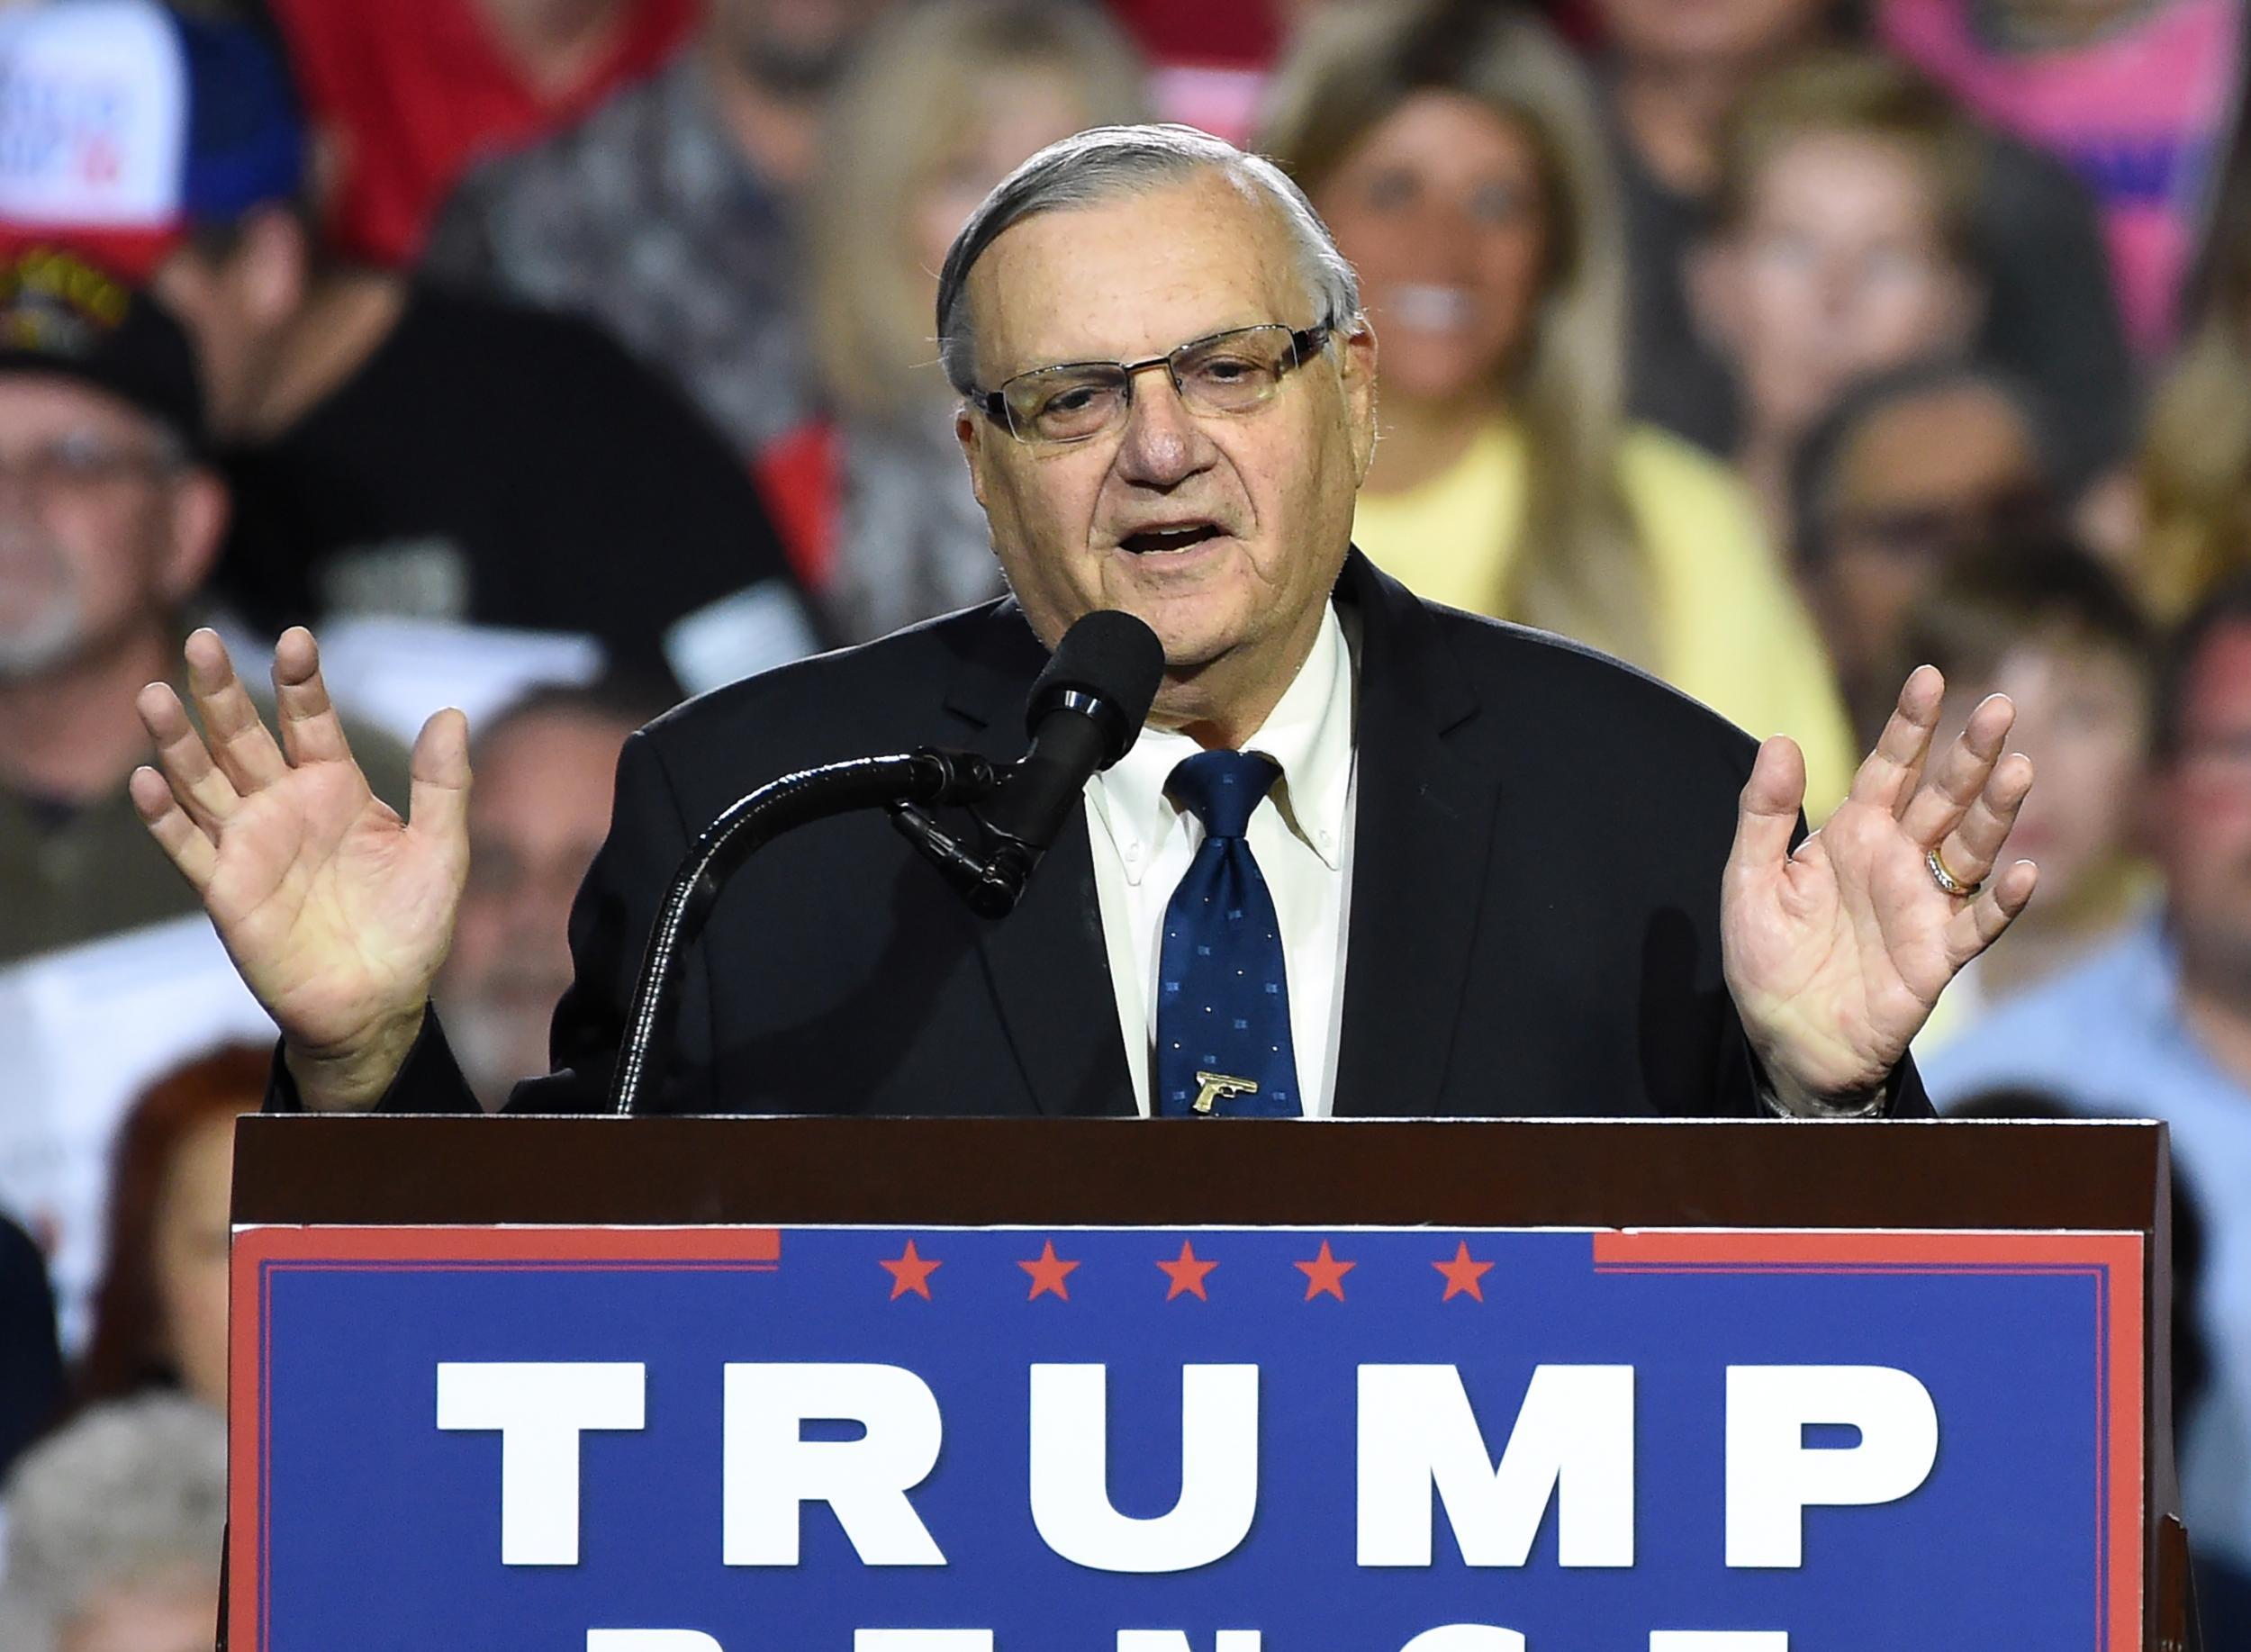 Sheriff Arpaio stumped for Donald Trump during the campaign